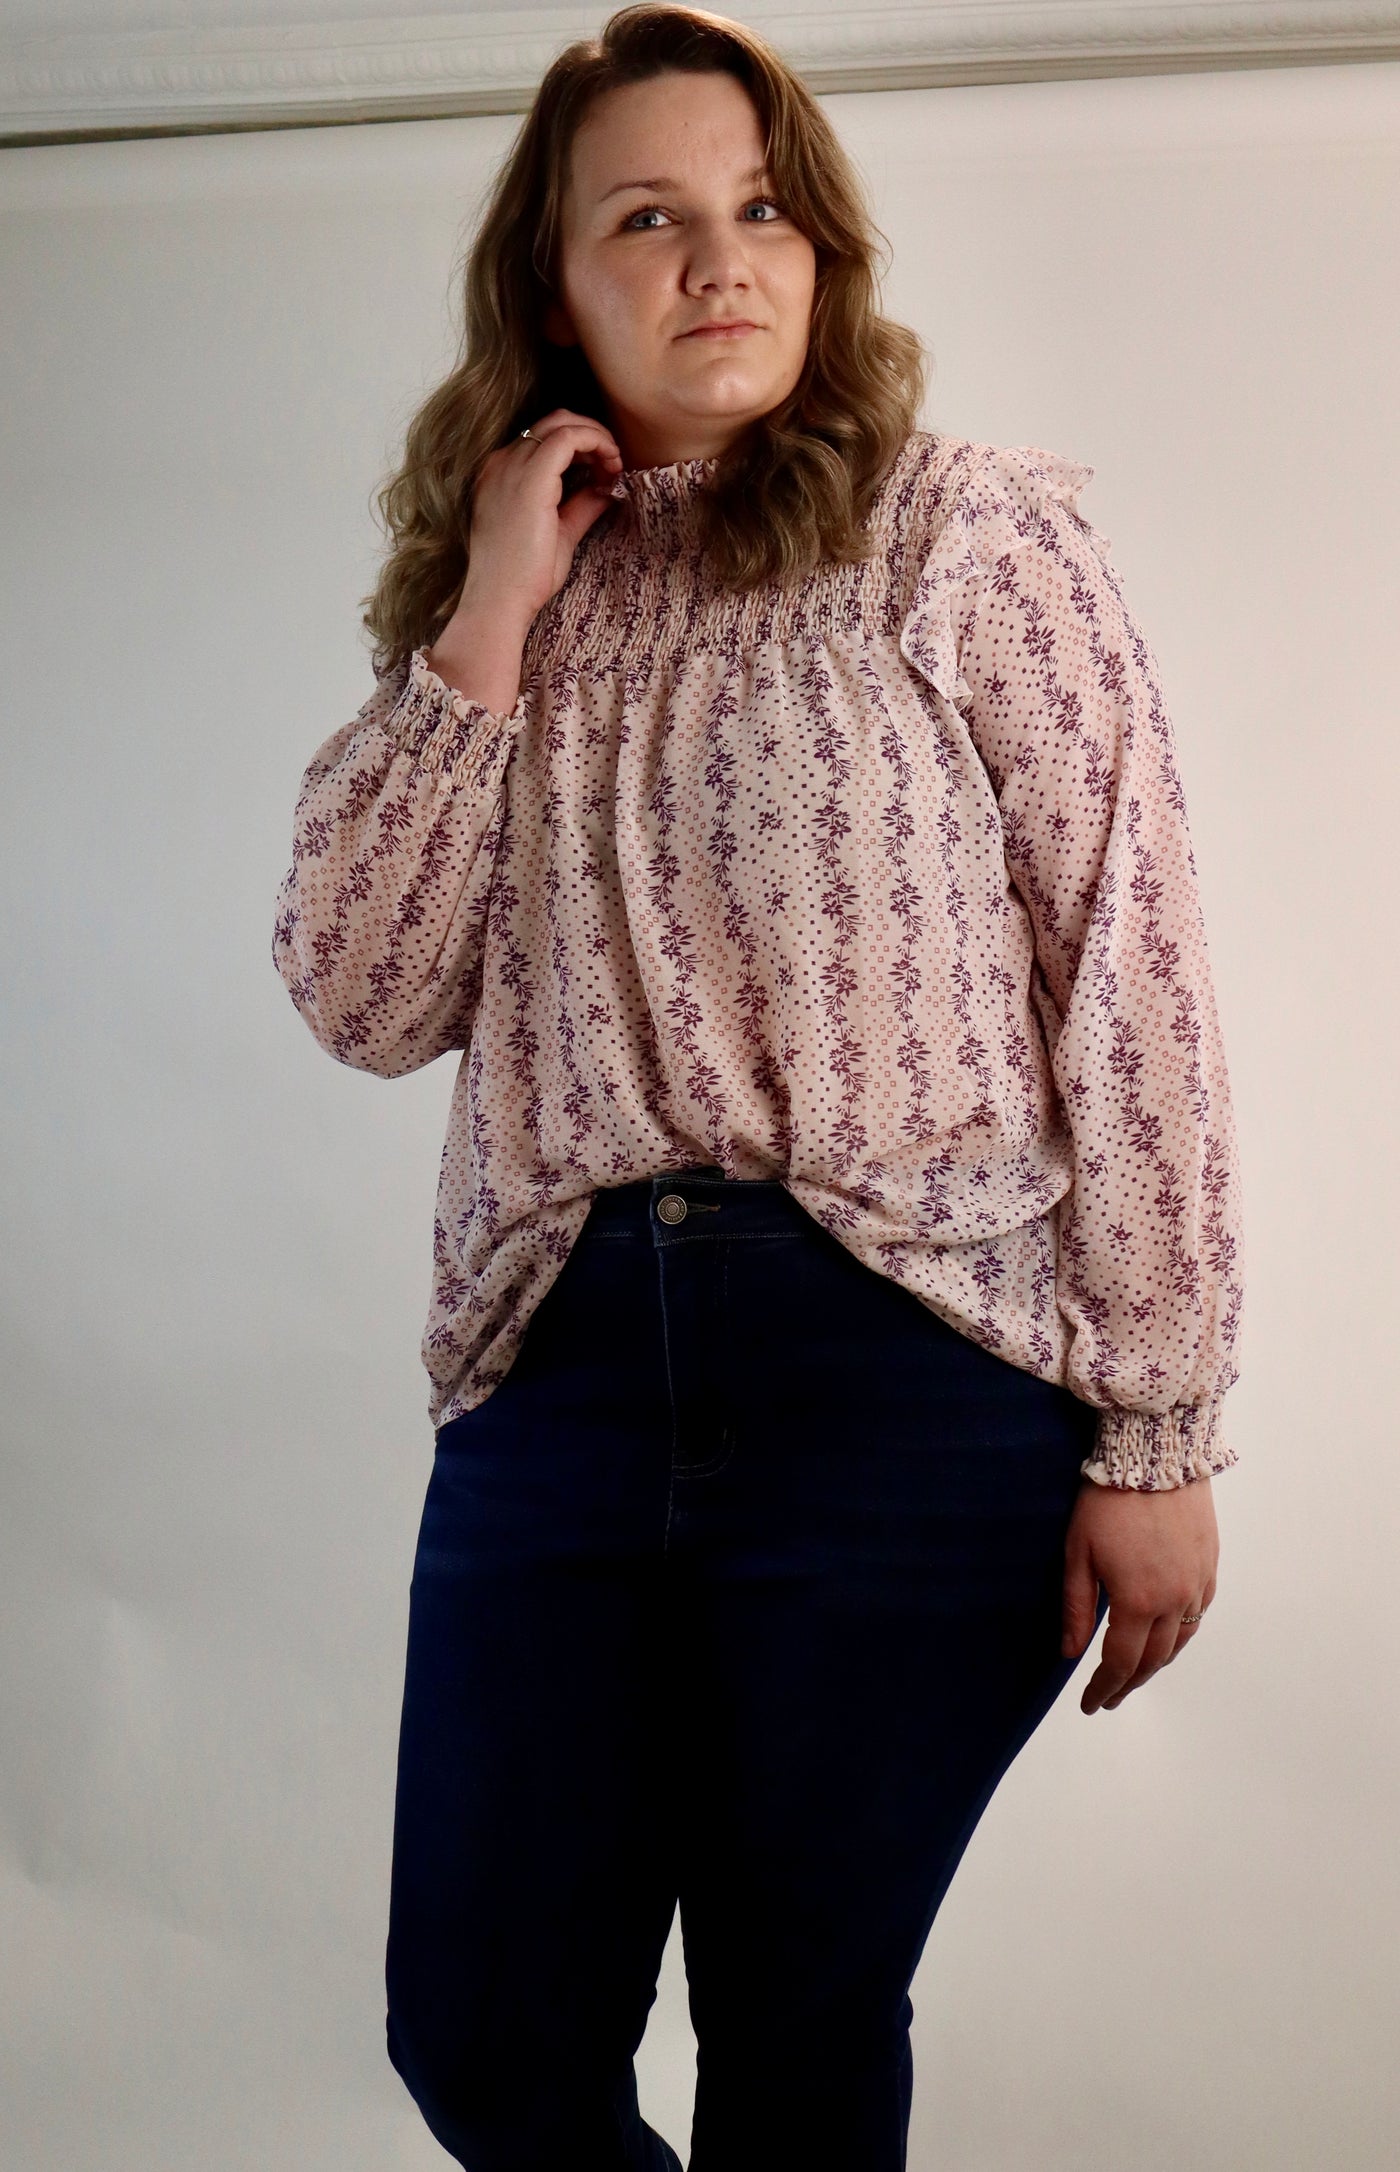 Women's curvy floral blouse with smocking details at the top and ruffles at the shoulder. Pink and purple make up this cream lightweight blouse. Plus sizes available